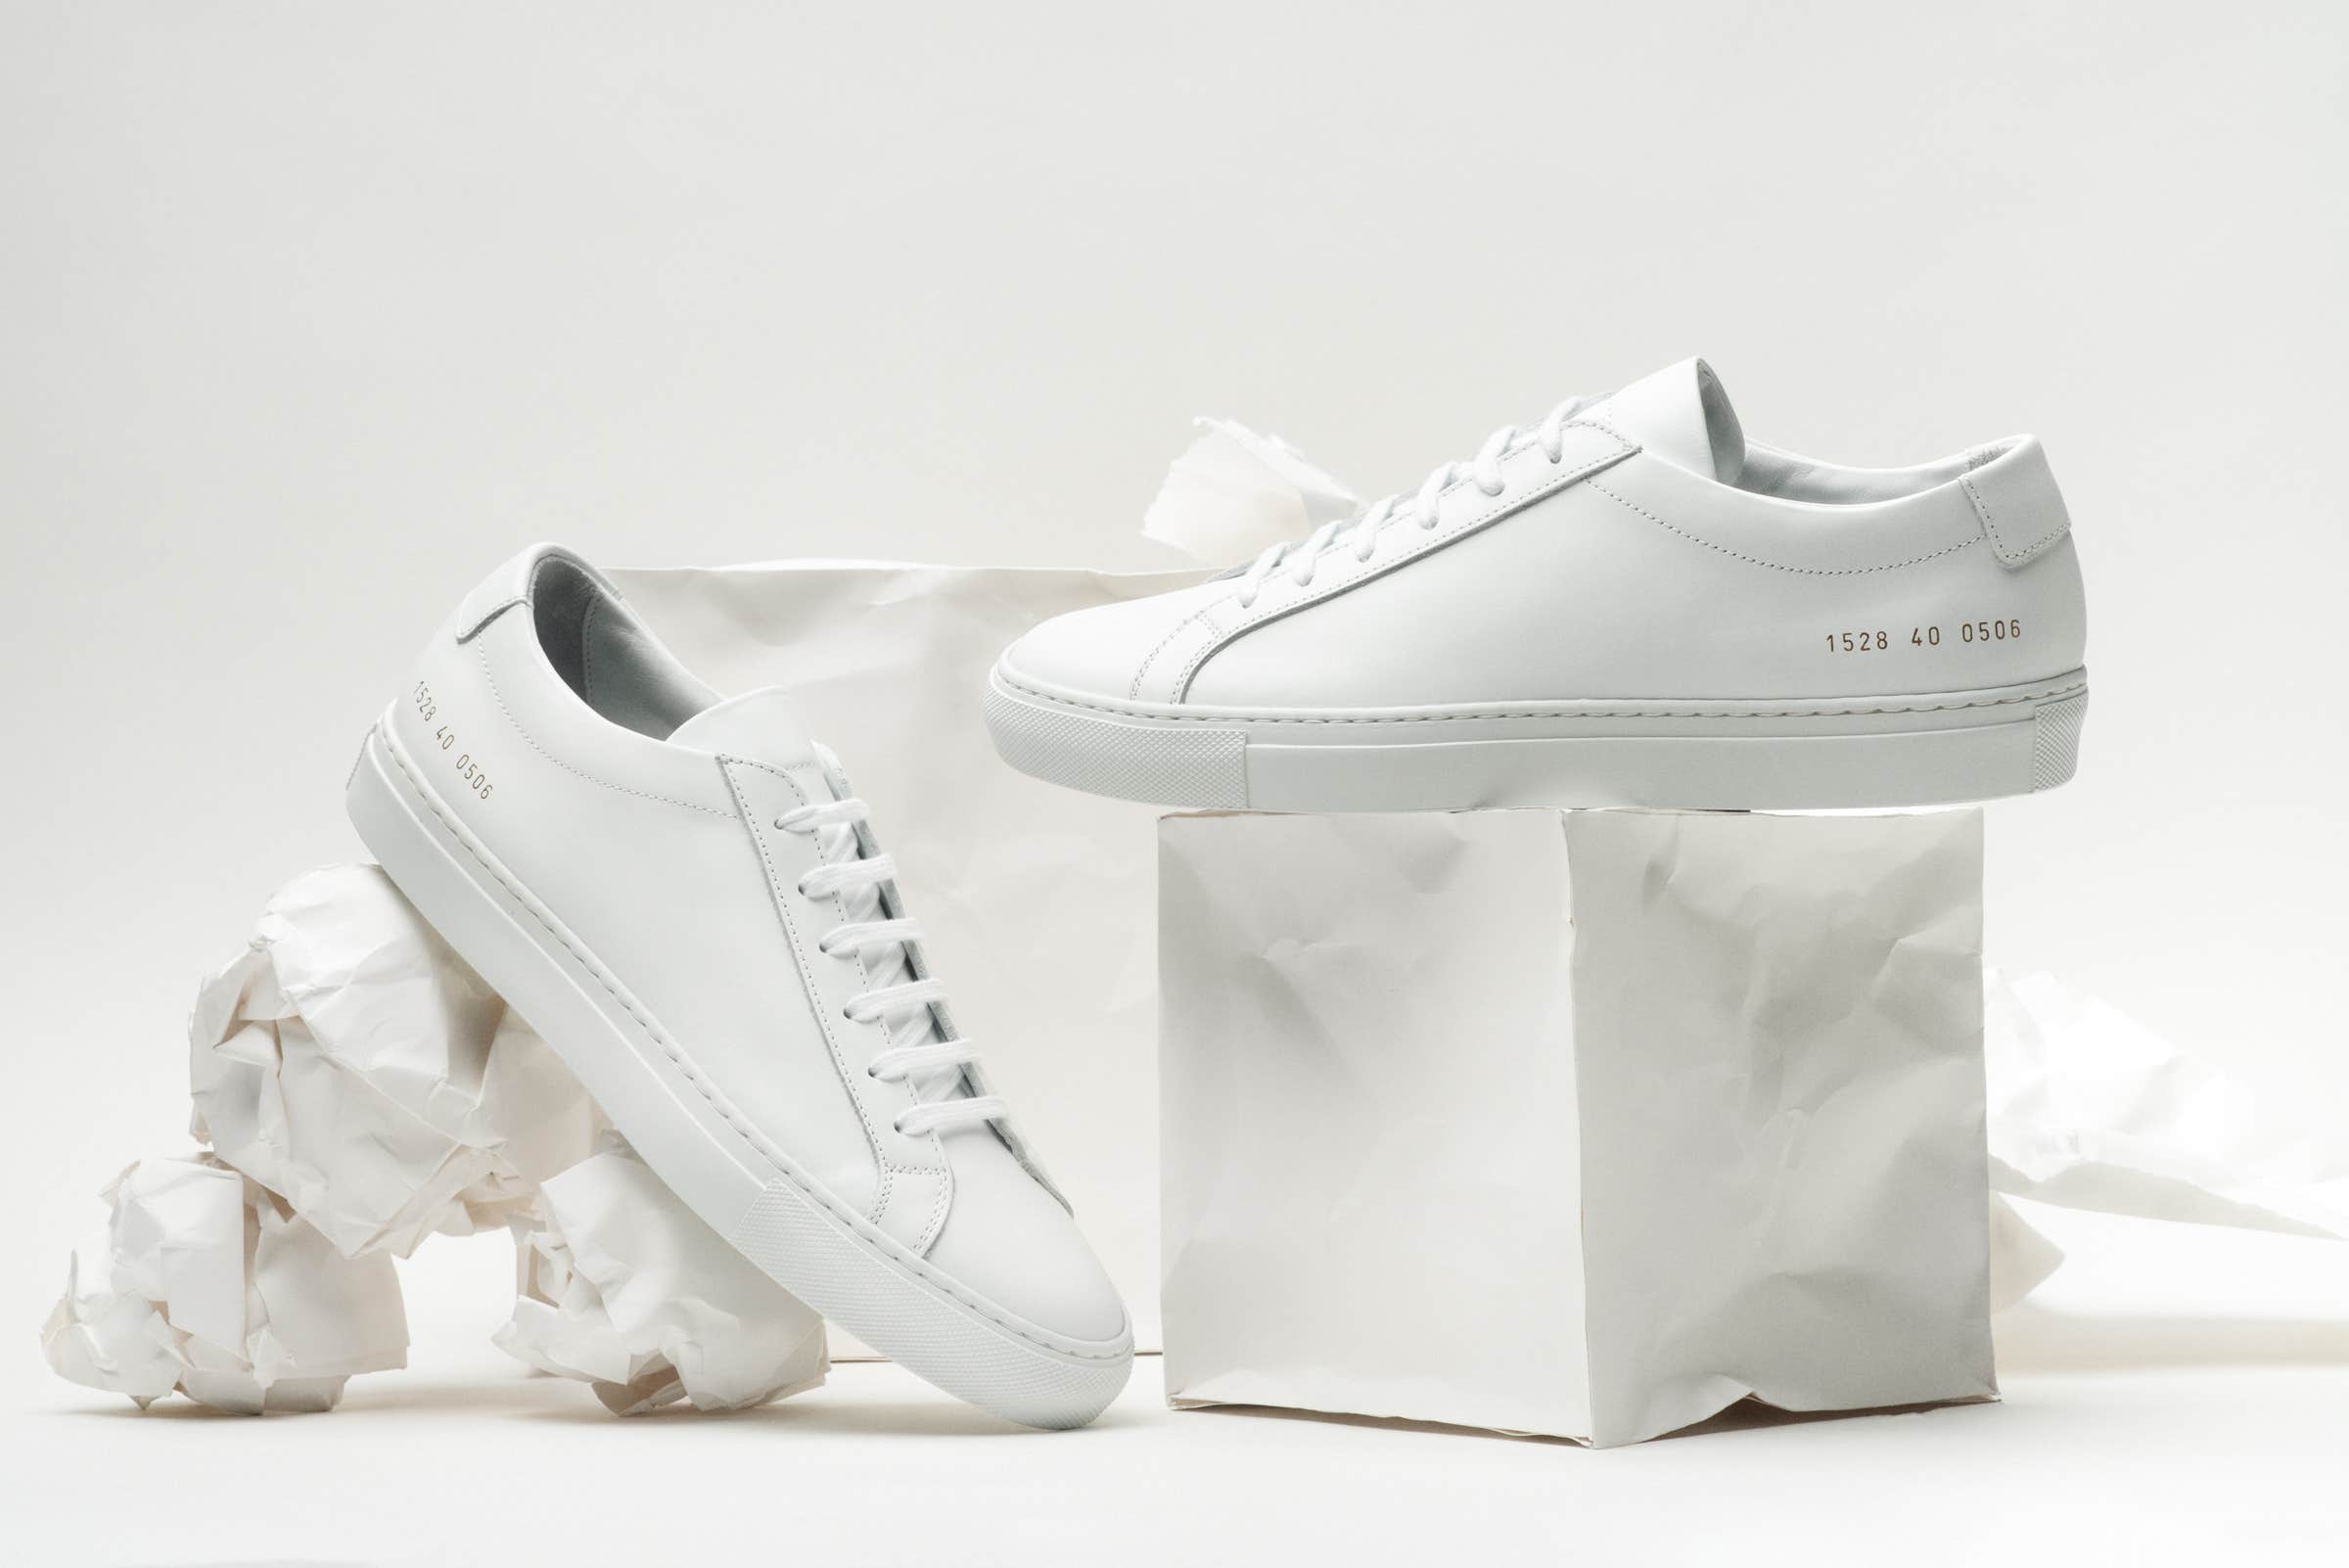 Introducing Common Projects to The Helm